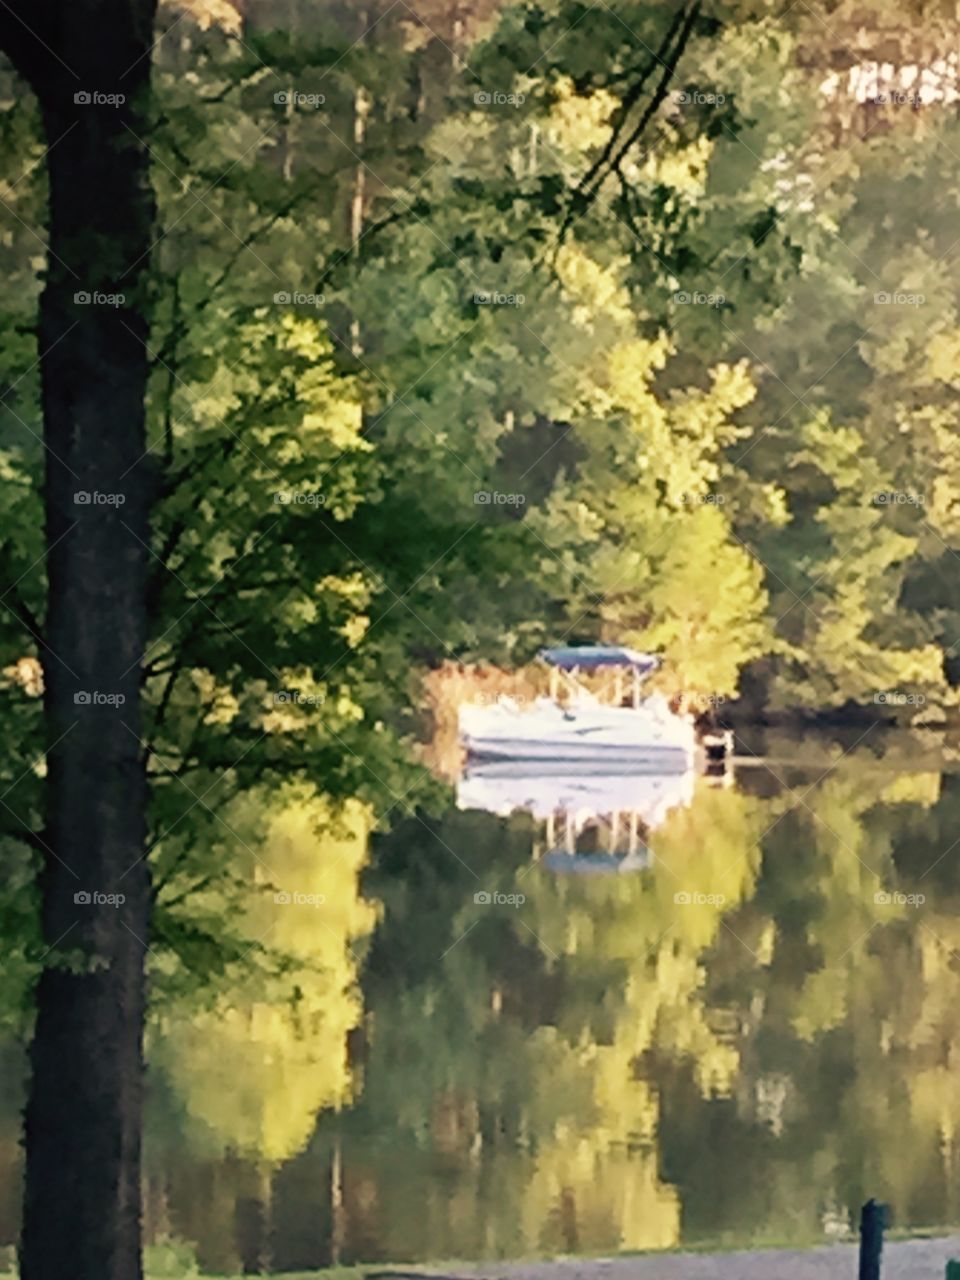 River with a leisure boat on it at Georgia National Park and campsite.